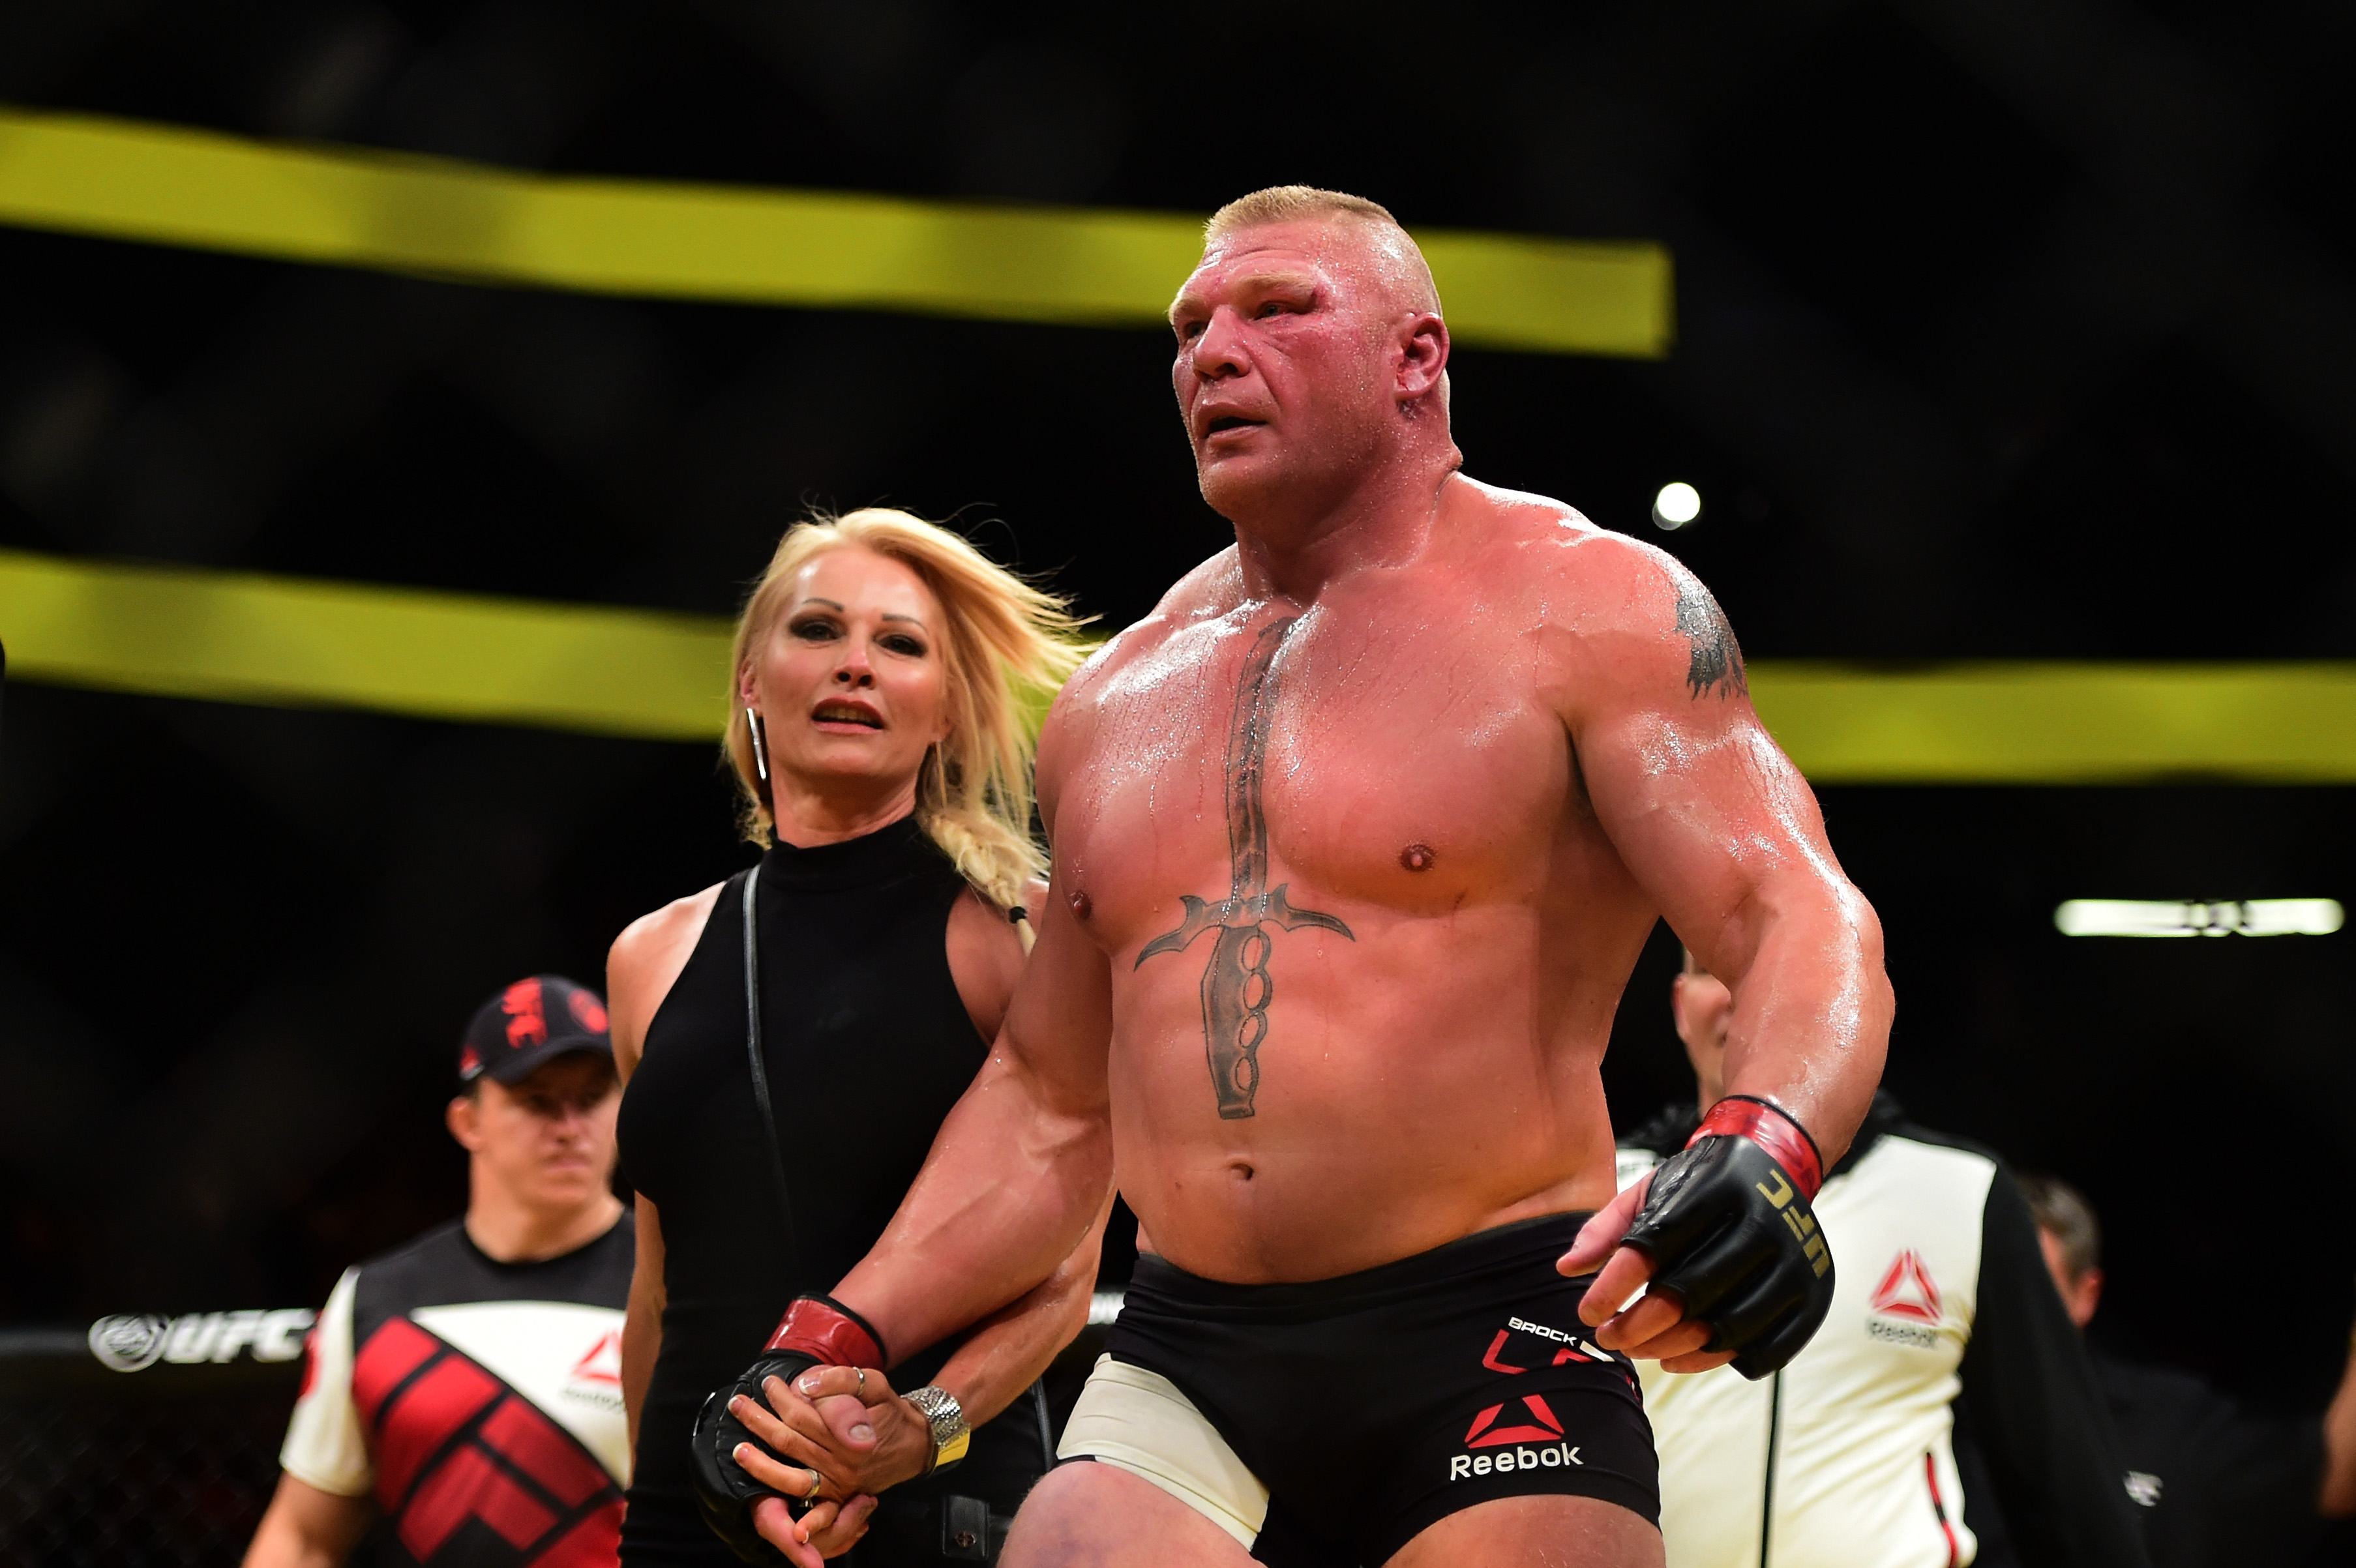 Brock Lesnar and his wife Rena Lesnar on July 9, 201,6 at T-Mobile Arena in Las Vegas, Nevada. | Source: Getty Images